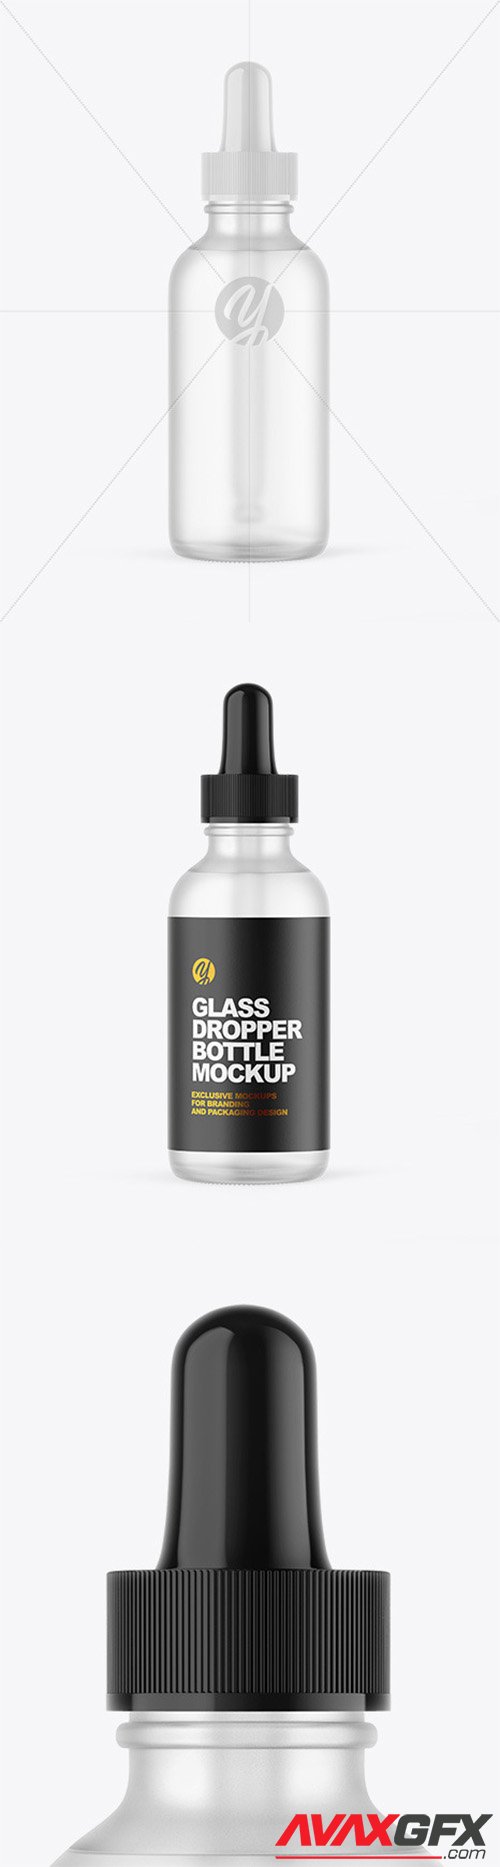 Download Frosted Glass Dropper Bottle Mockup 51532 » AVAXGFX - All Downloads that You Need in One Place ...